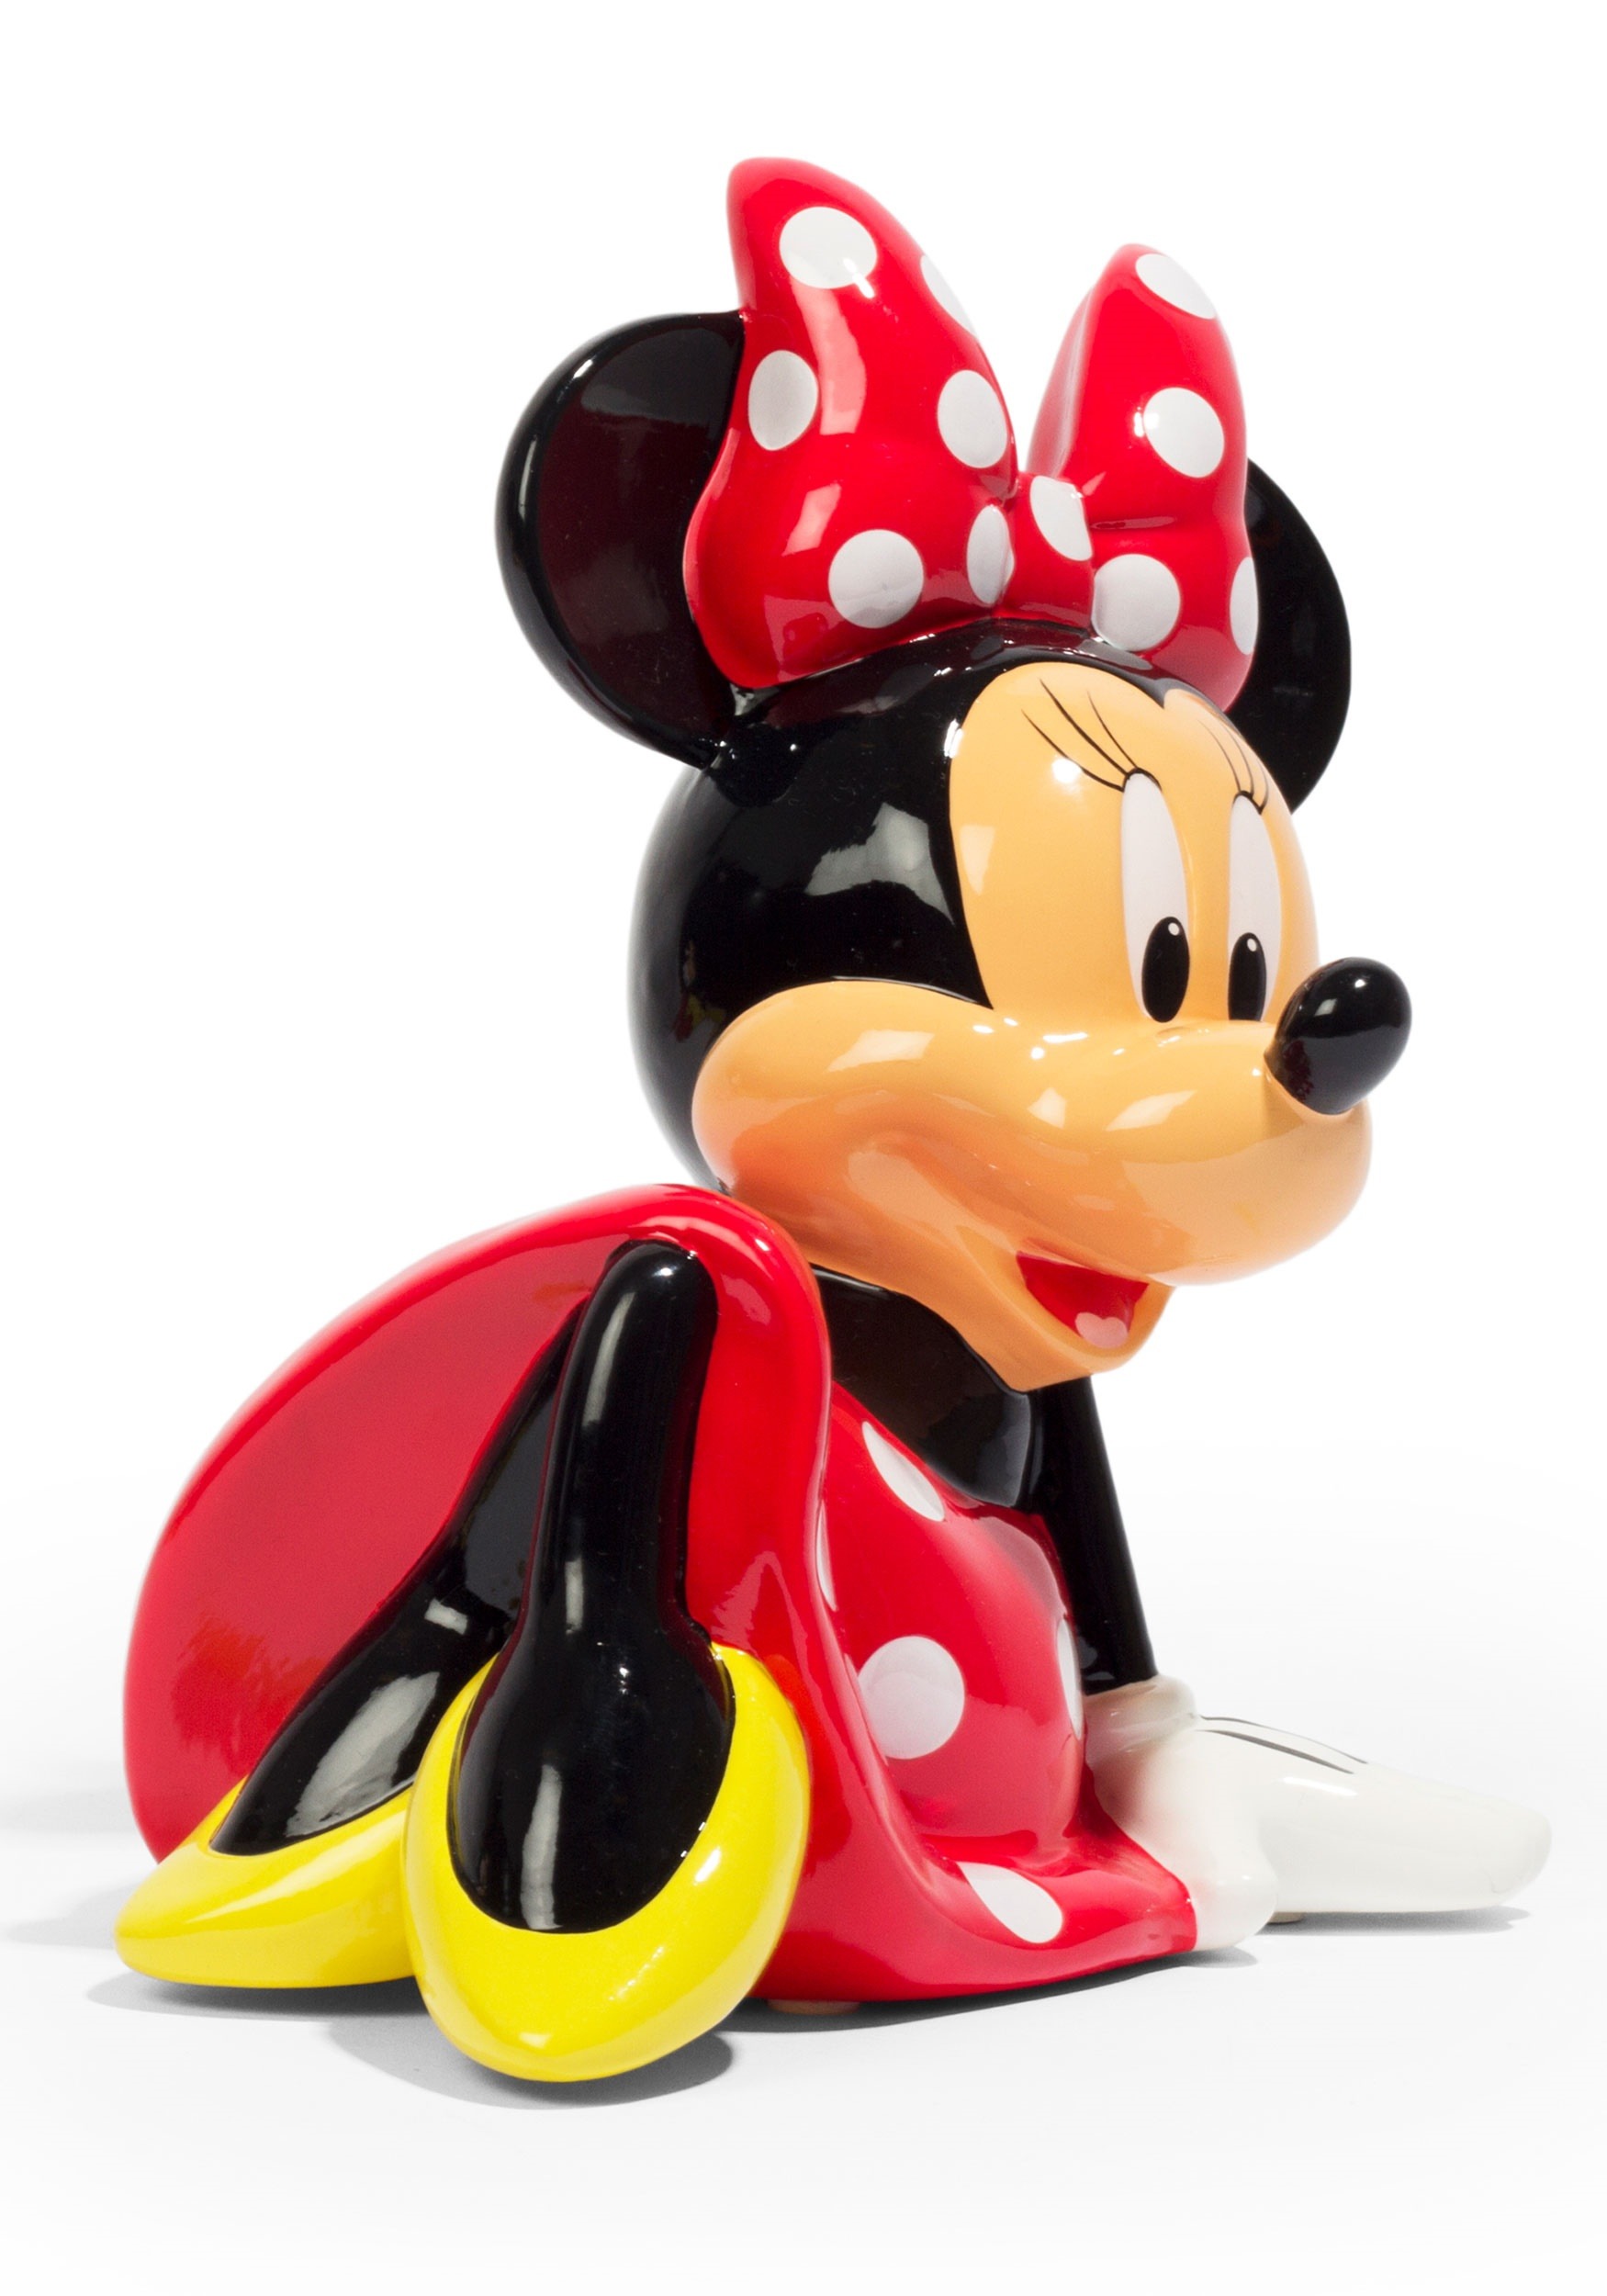 Disney Minnie Mouse Ceramic Coin Bank